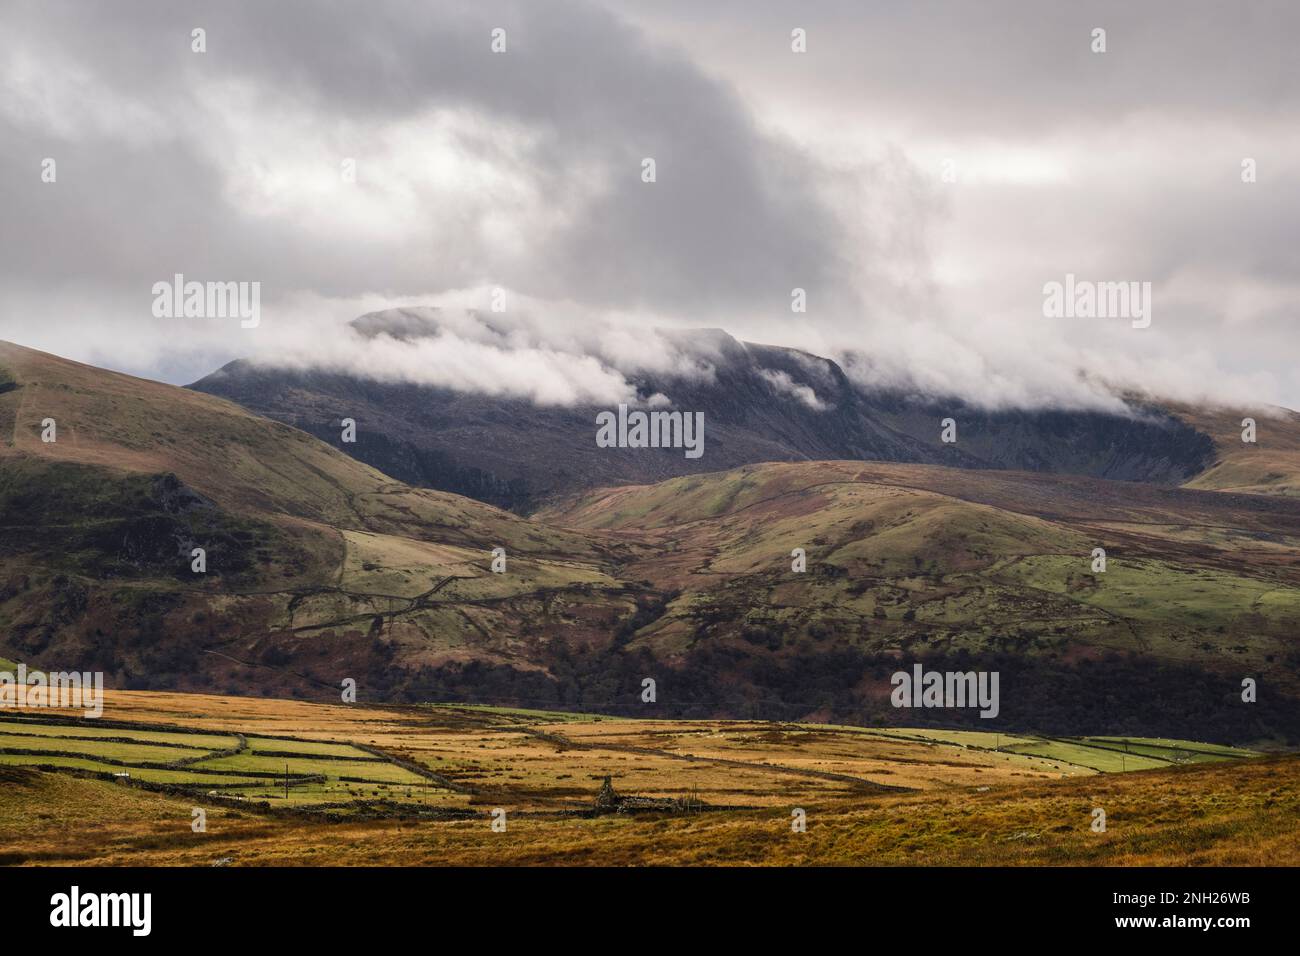 View south across Nantlle valley to Craig Cwm Silyn on the Nantlle Ridge in Snowdonia National Park from Y Fron, Gwynedd, Wales, UK, Britain Stock Photo